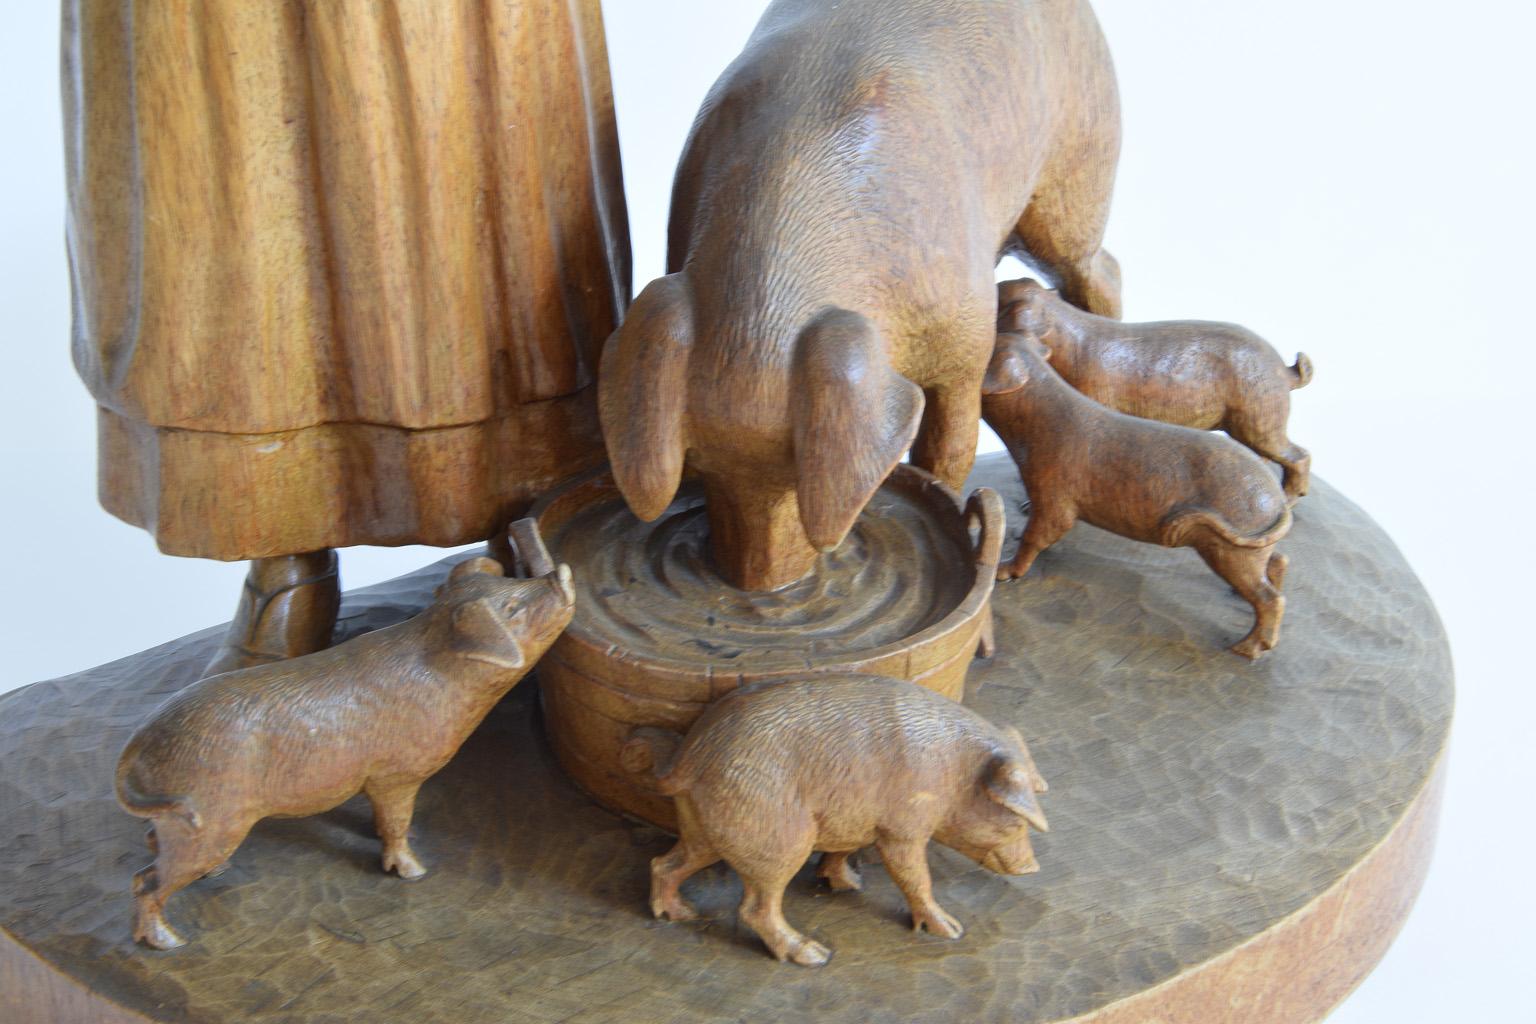 Feeding of cute pigs family with maiden - Swiss wood carving from Hans Trauffer (1899-1967) Davos in the 1930s. Brienz Wood Carving
Made from one piece of a block of wood. Very fine and detailed wood carving.
 